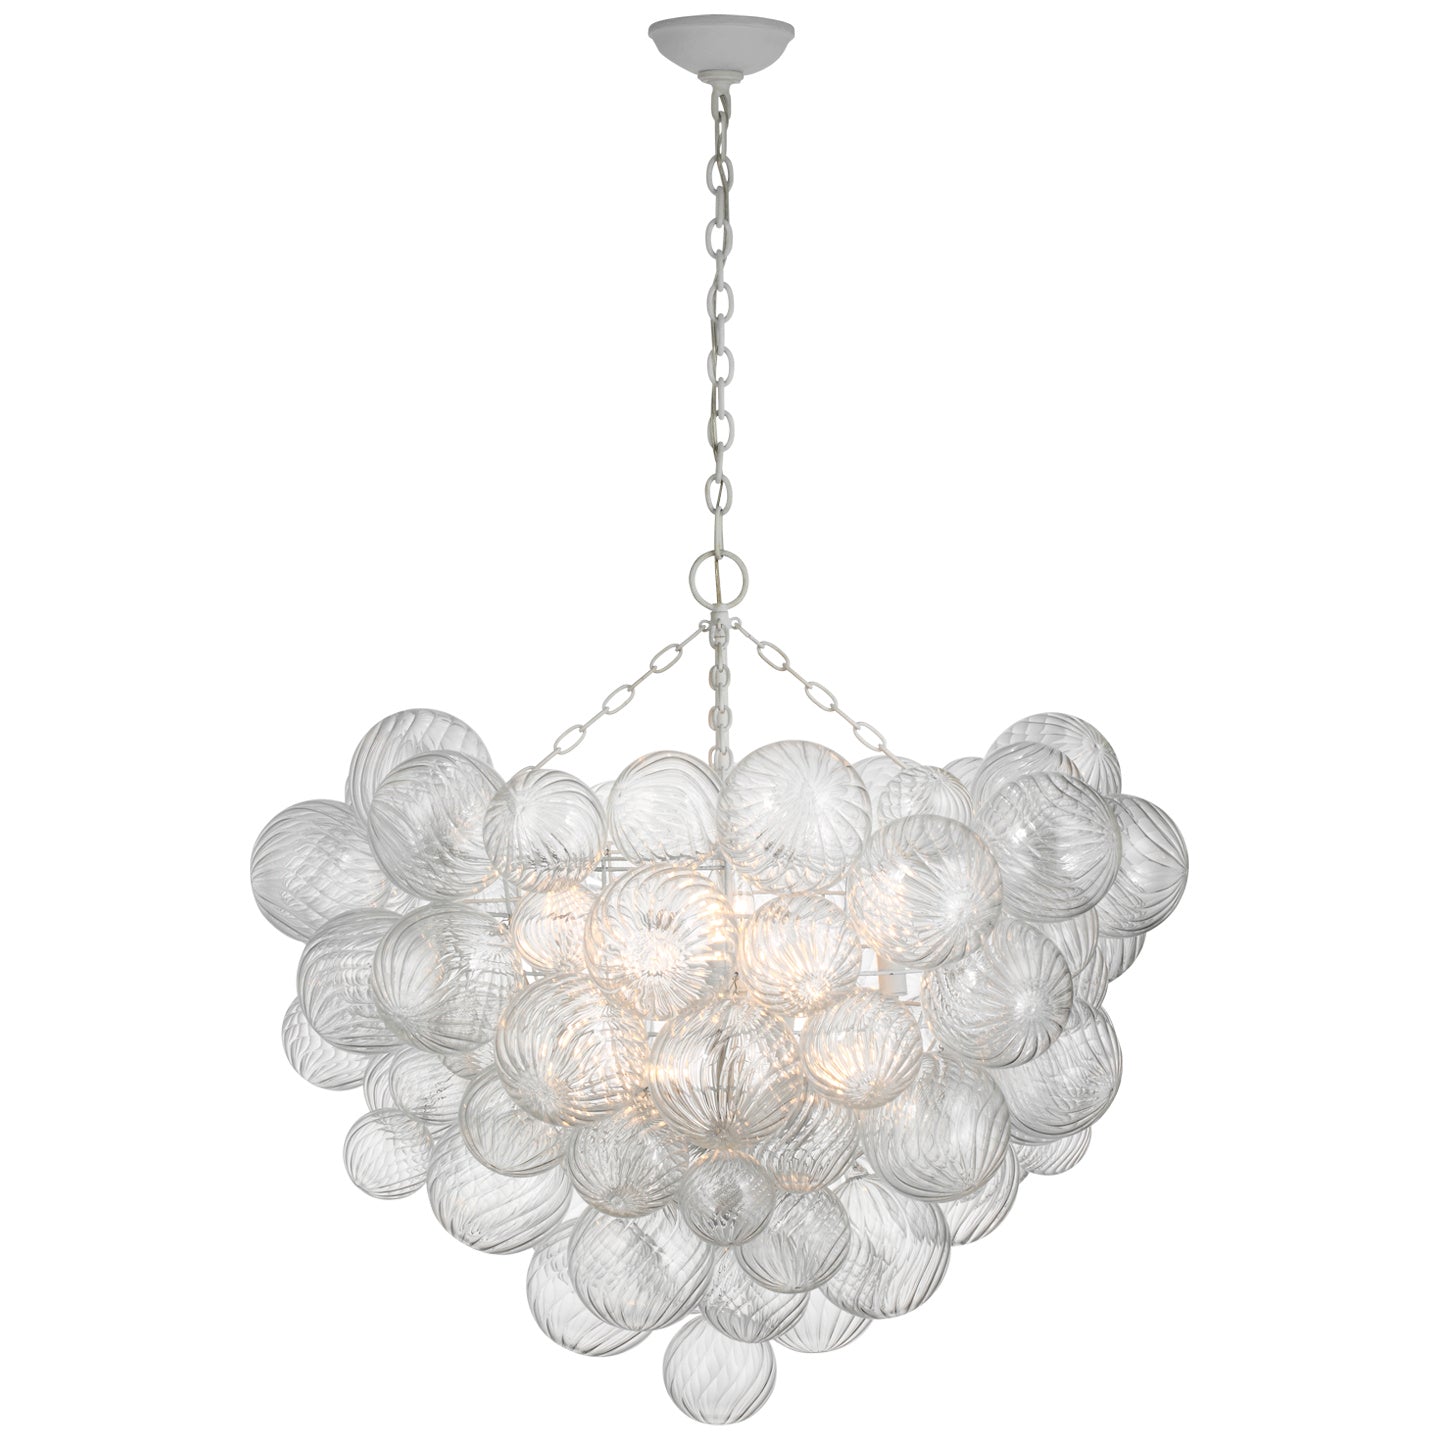 Load image into Gallery viewer, Visual Comfort Signature - JN 5113PW-CG - LED Chandelier - Talia - Plaster White
